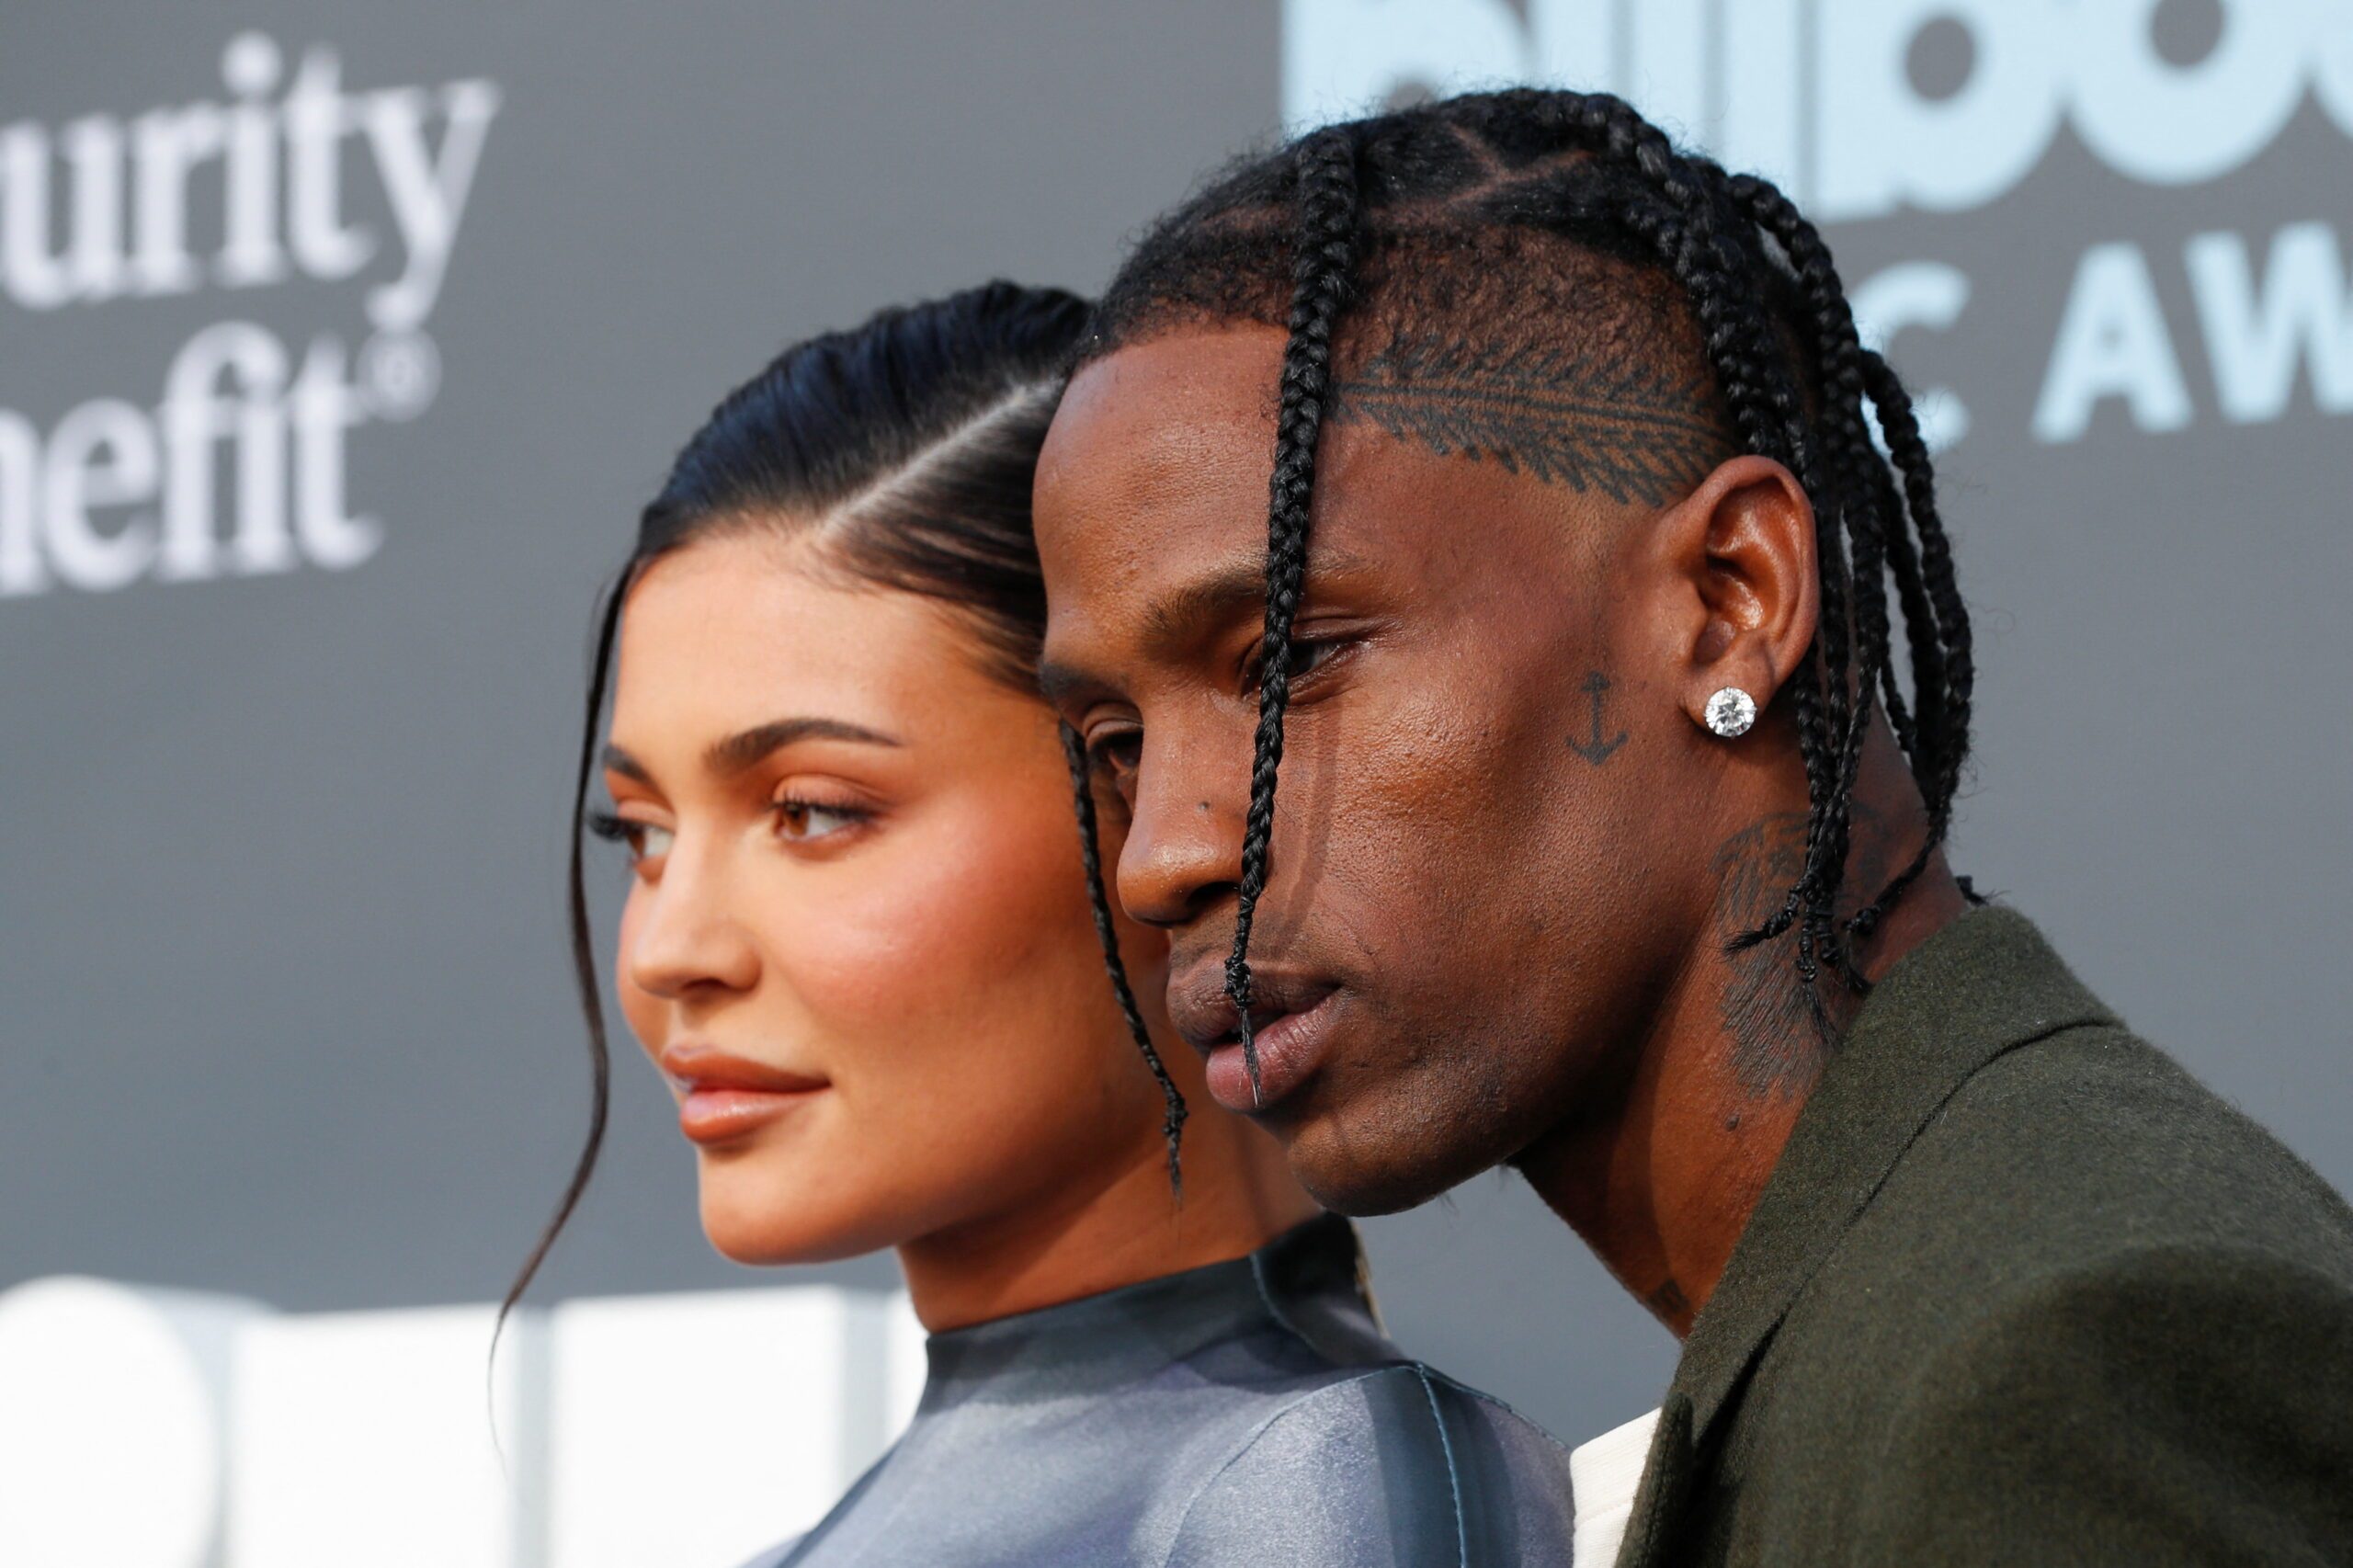 IN PHOTOS: Red carpet looks at the Billboard Music Awards 2022